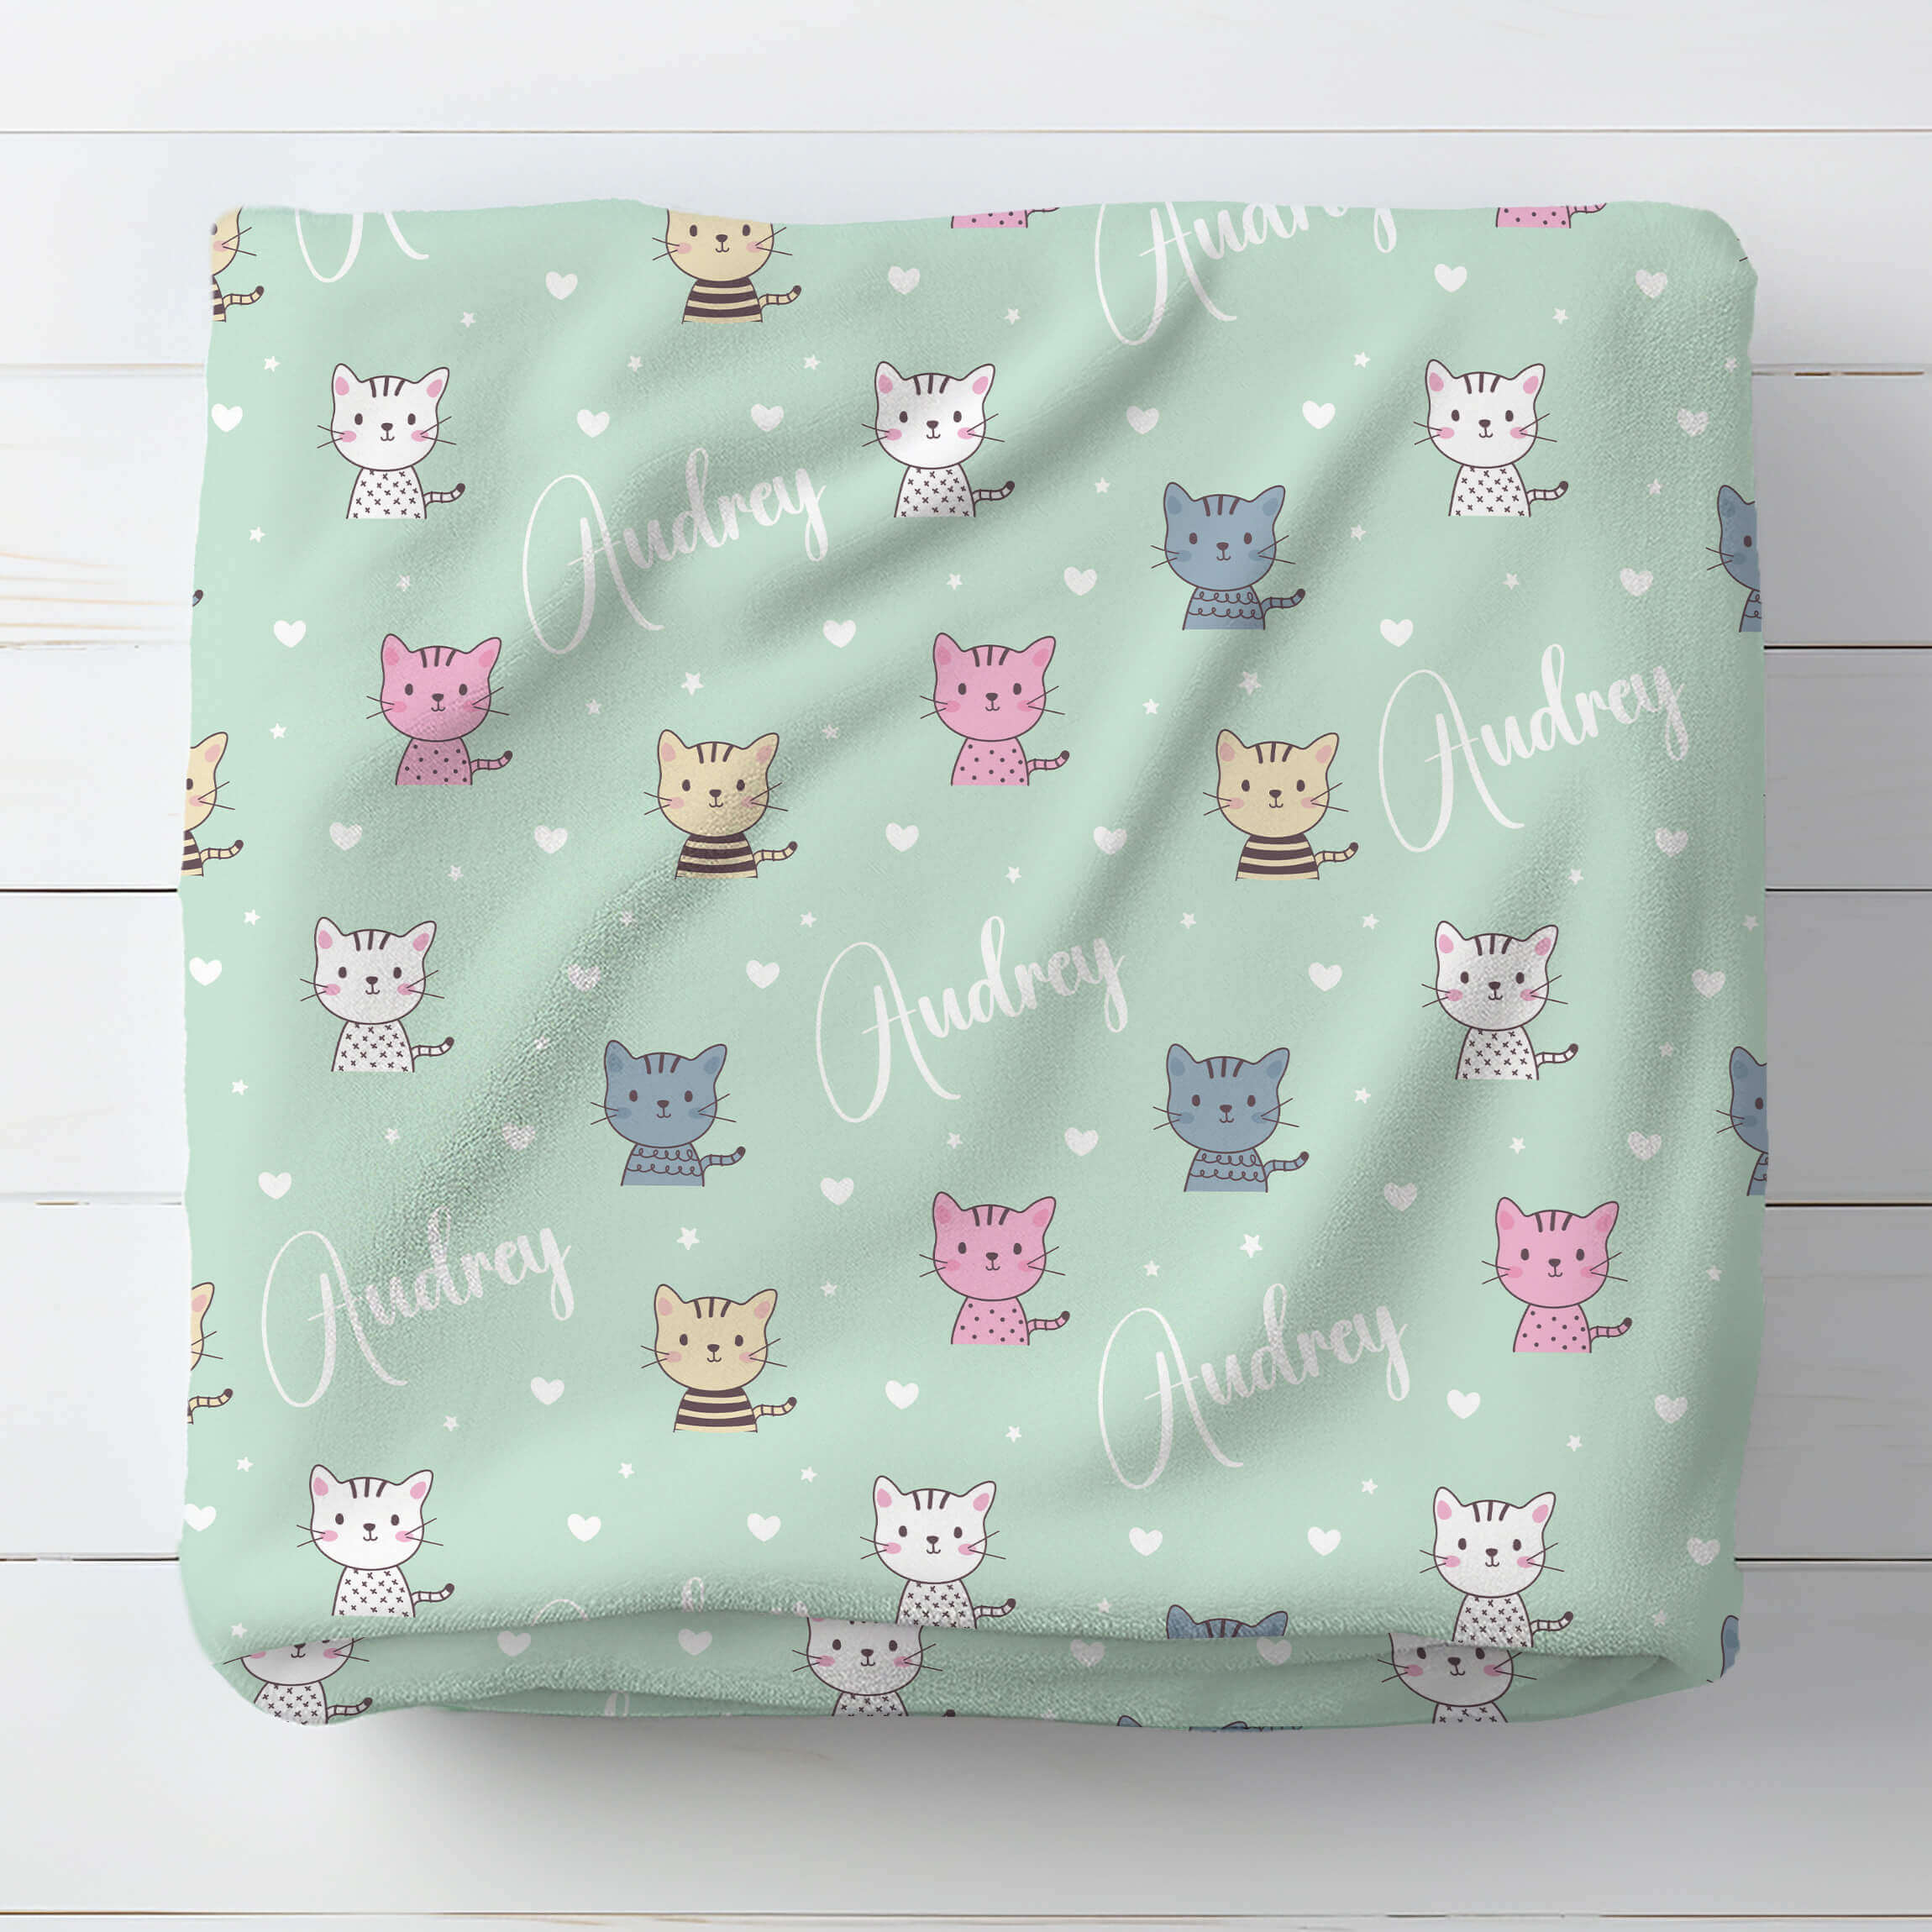 Personalized Name Blanket - Cute Kittens